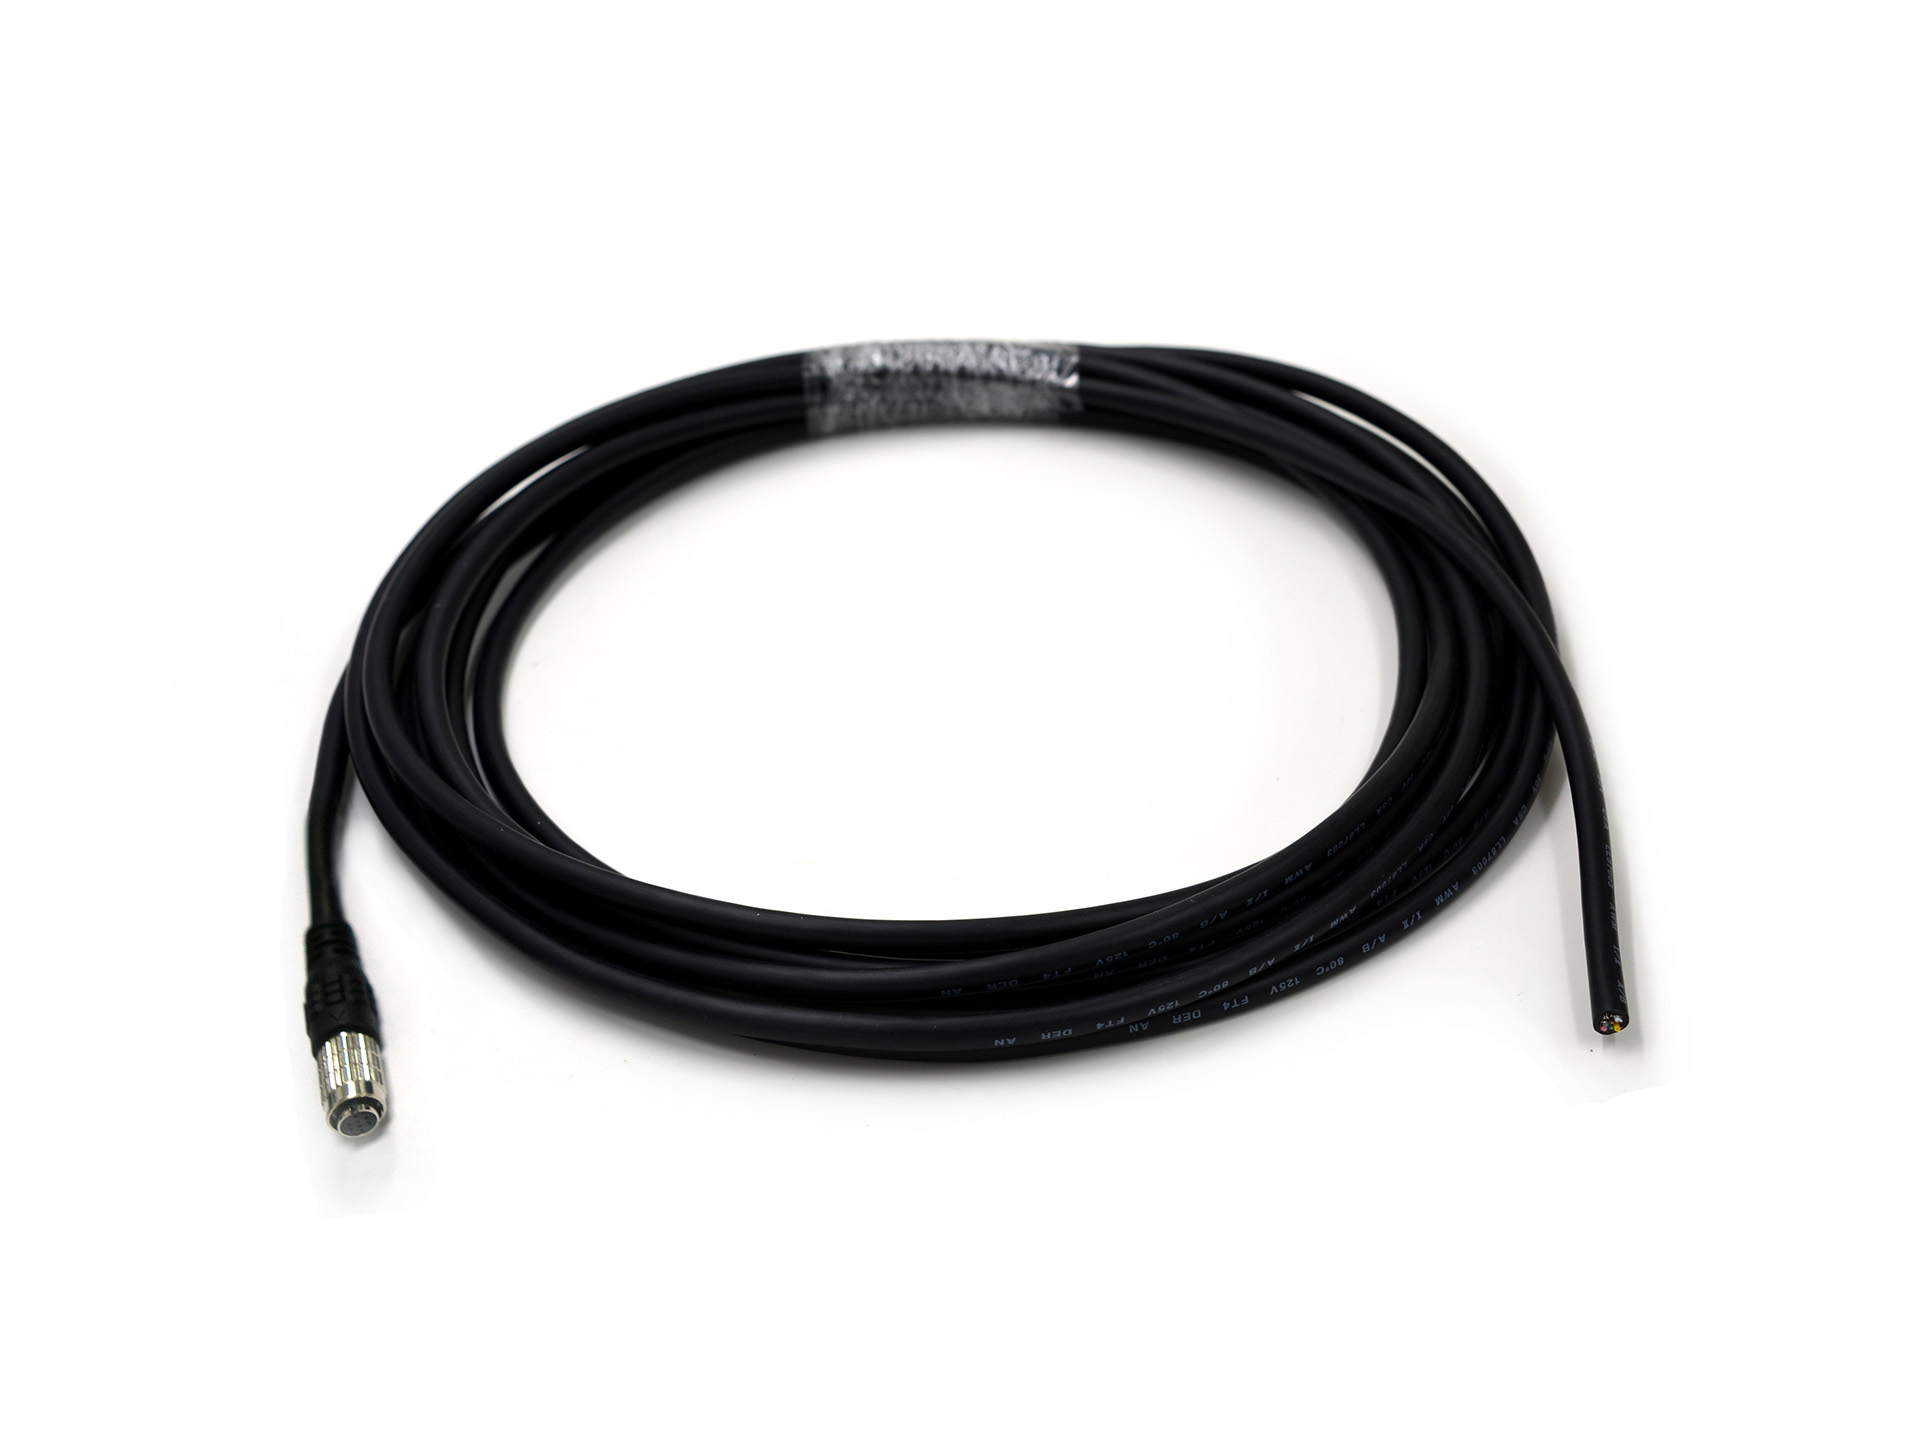 Hirose 8pin female cable for power supply and io trigger